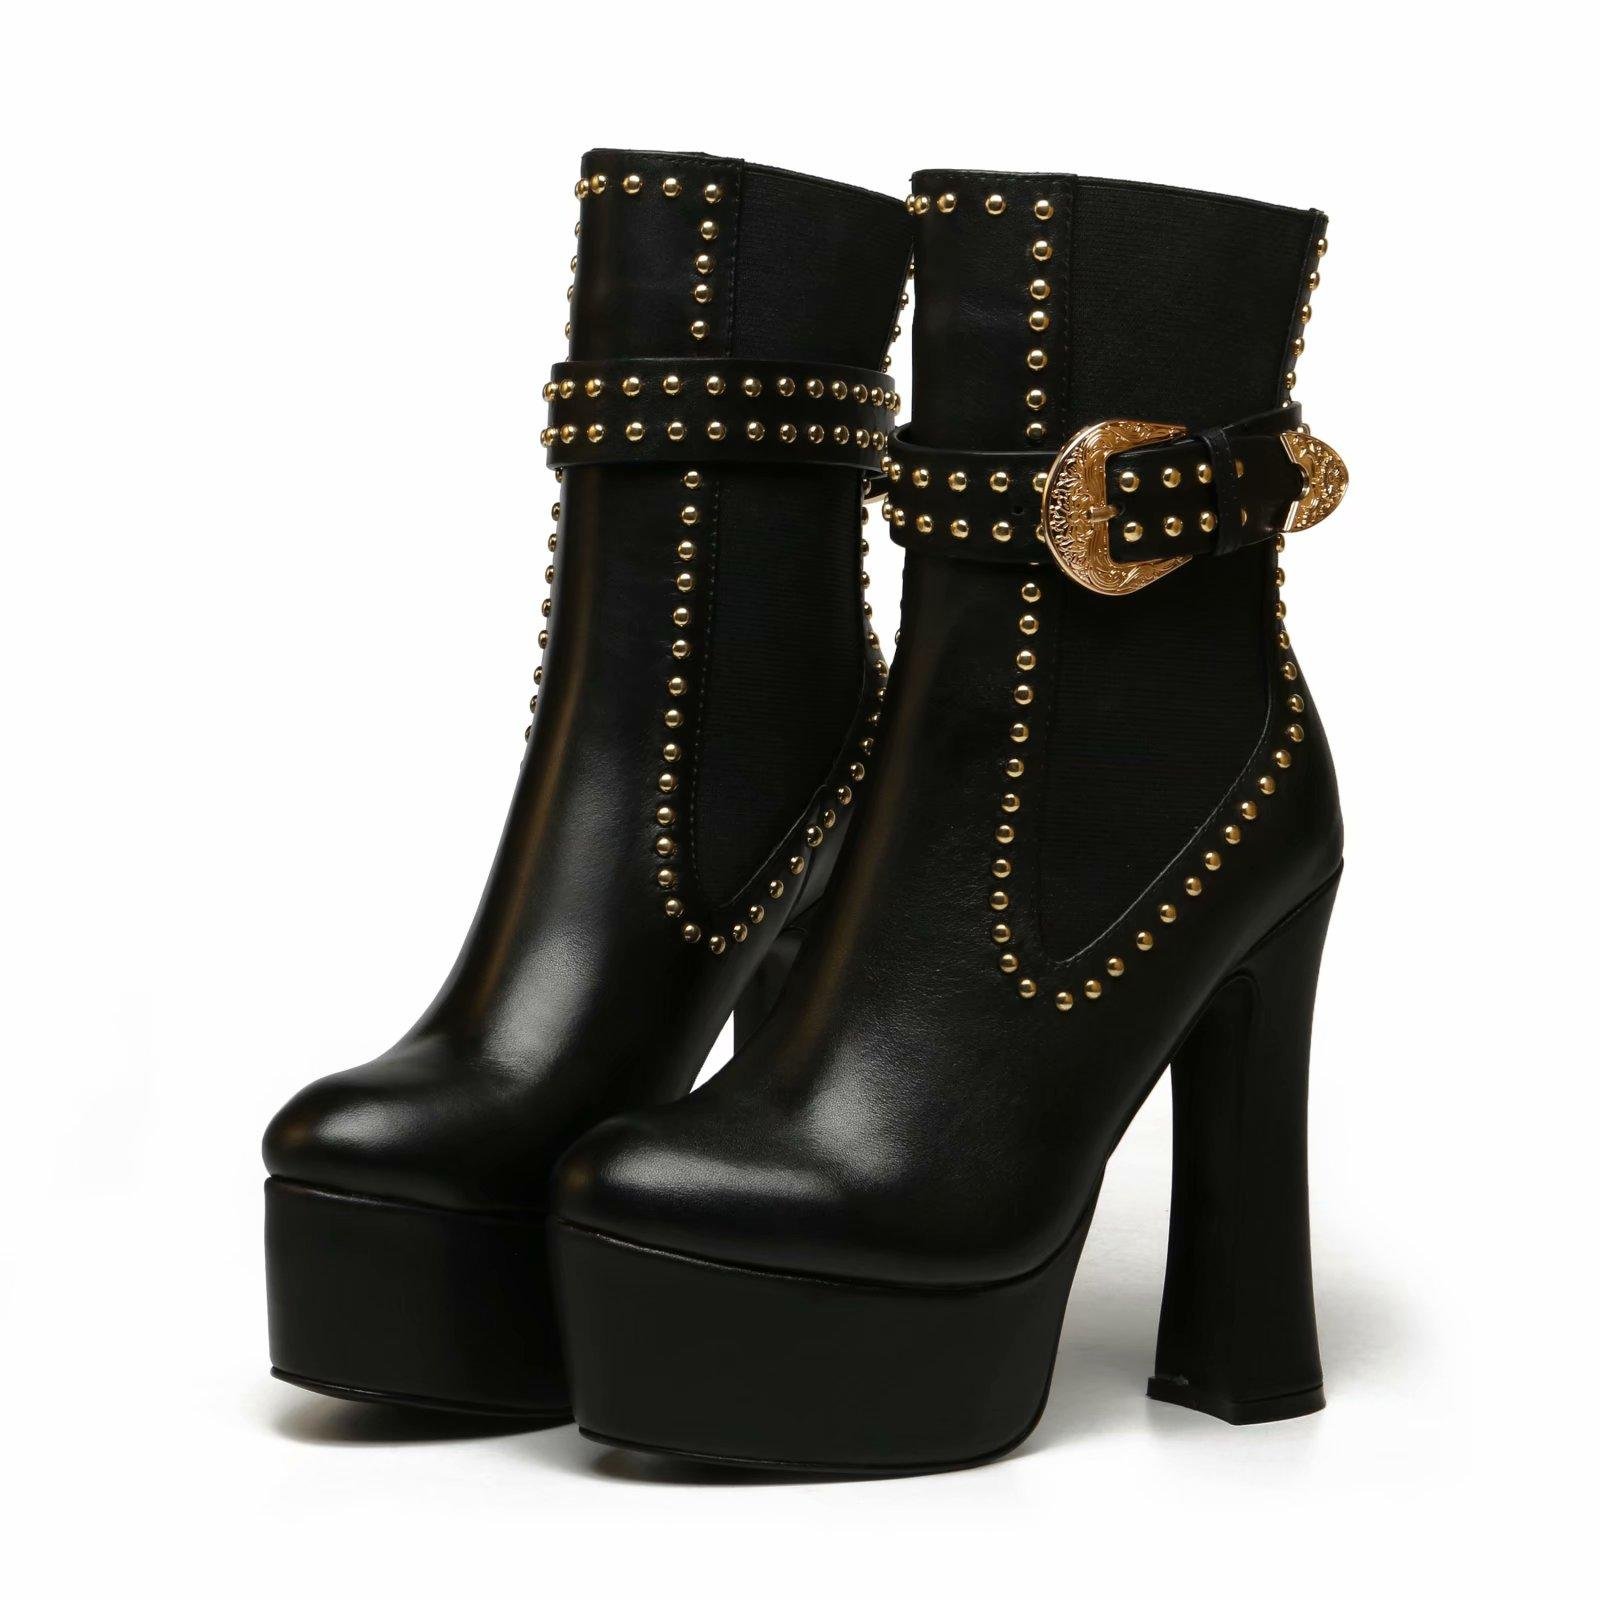         Studded Leather Platform Ankle Boots for Women high heel boots 